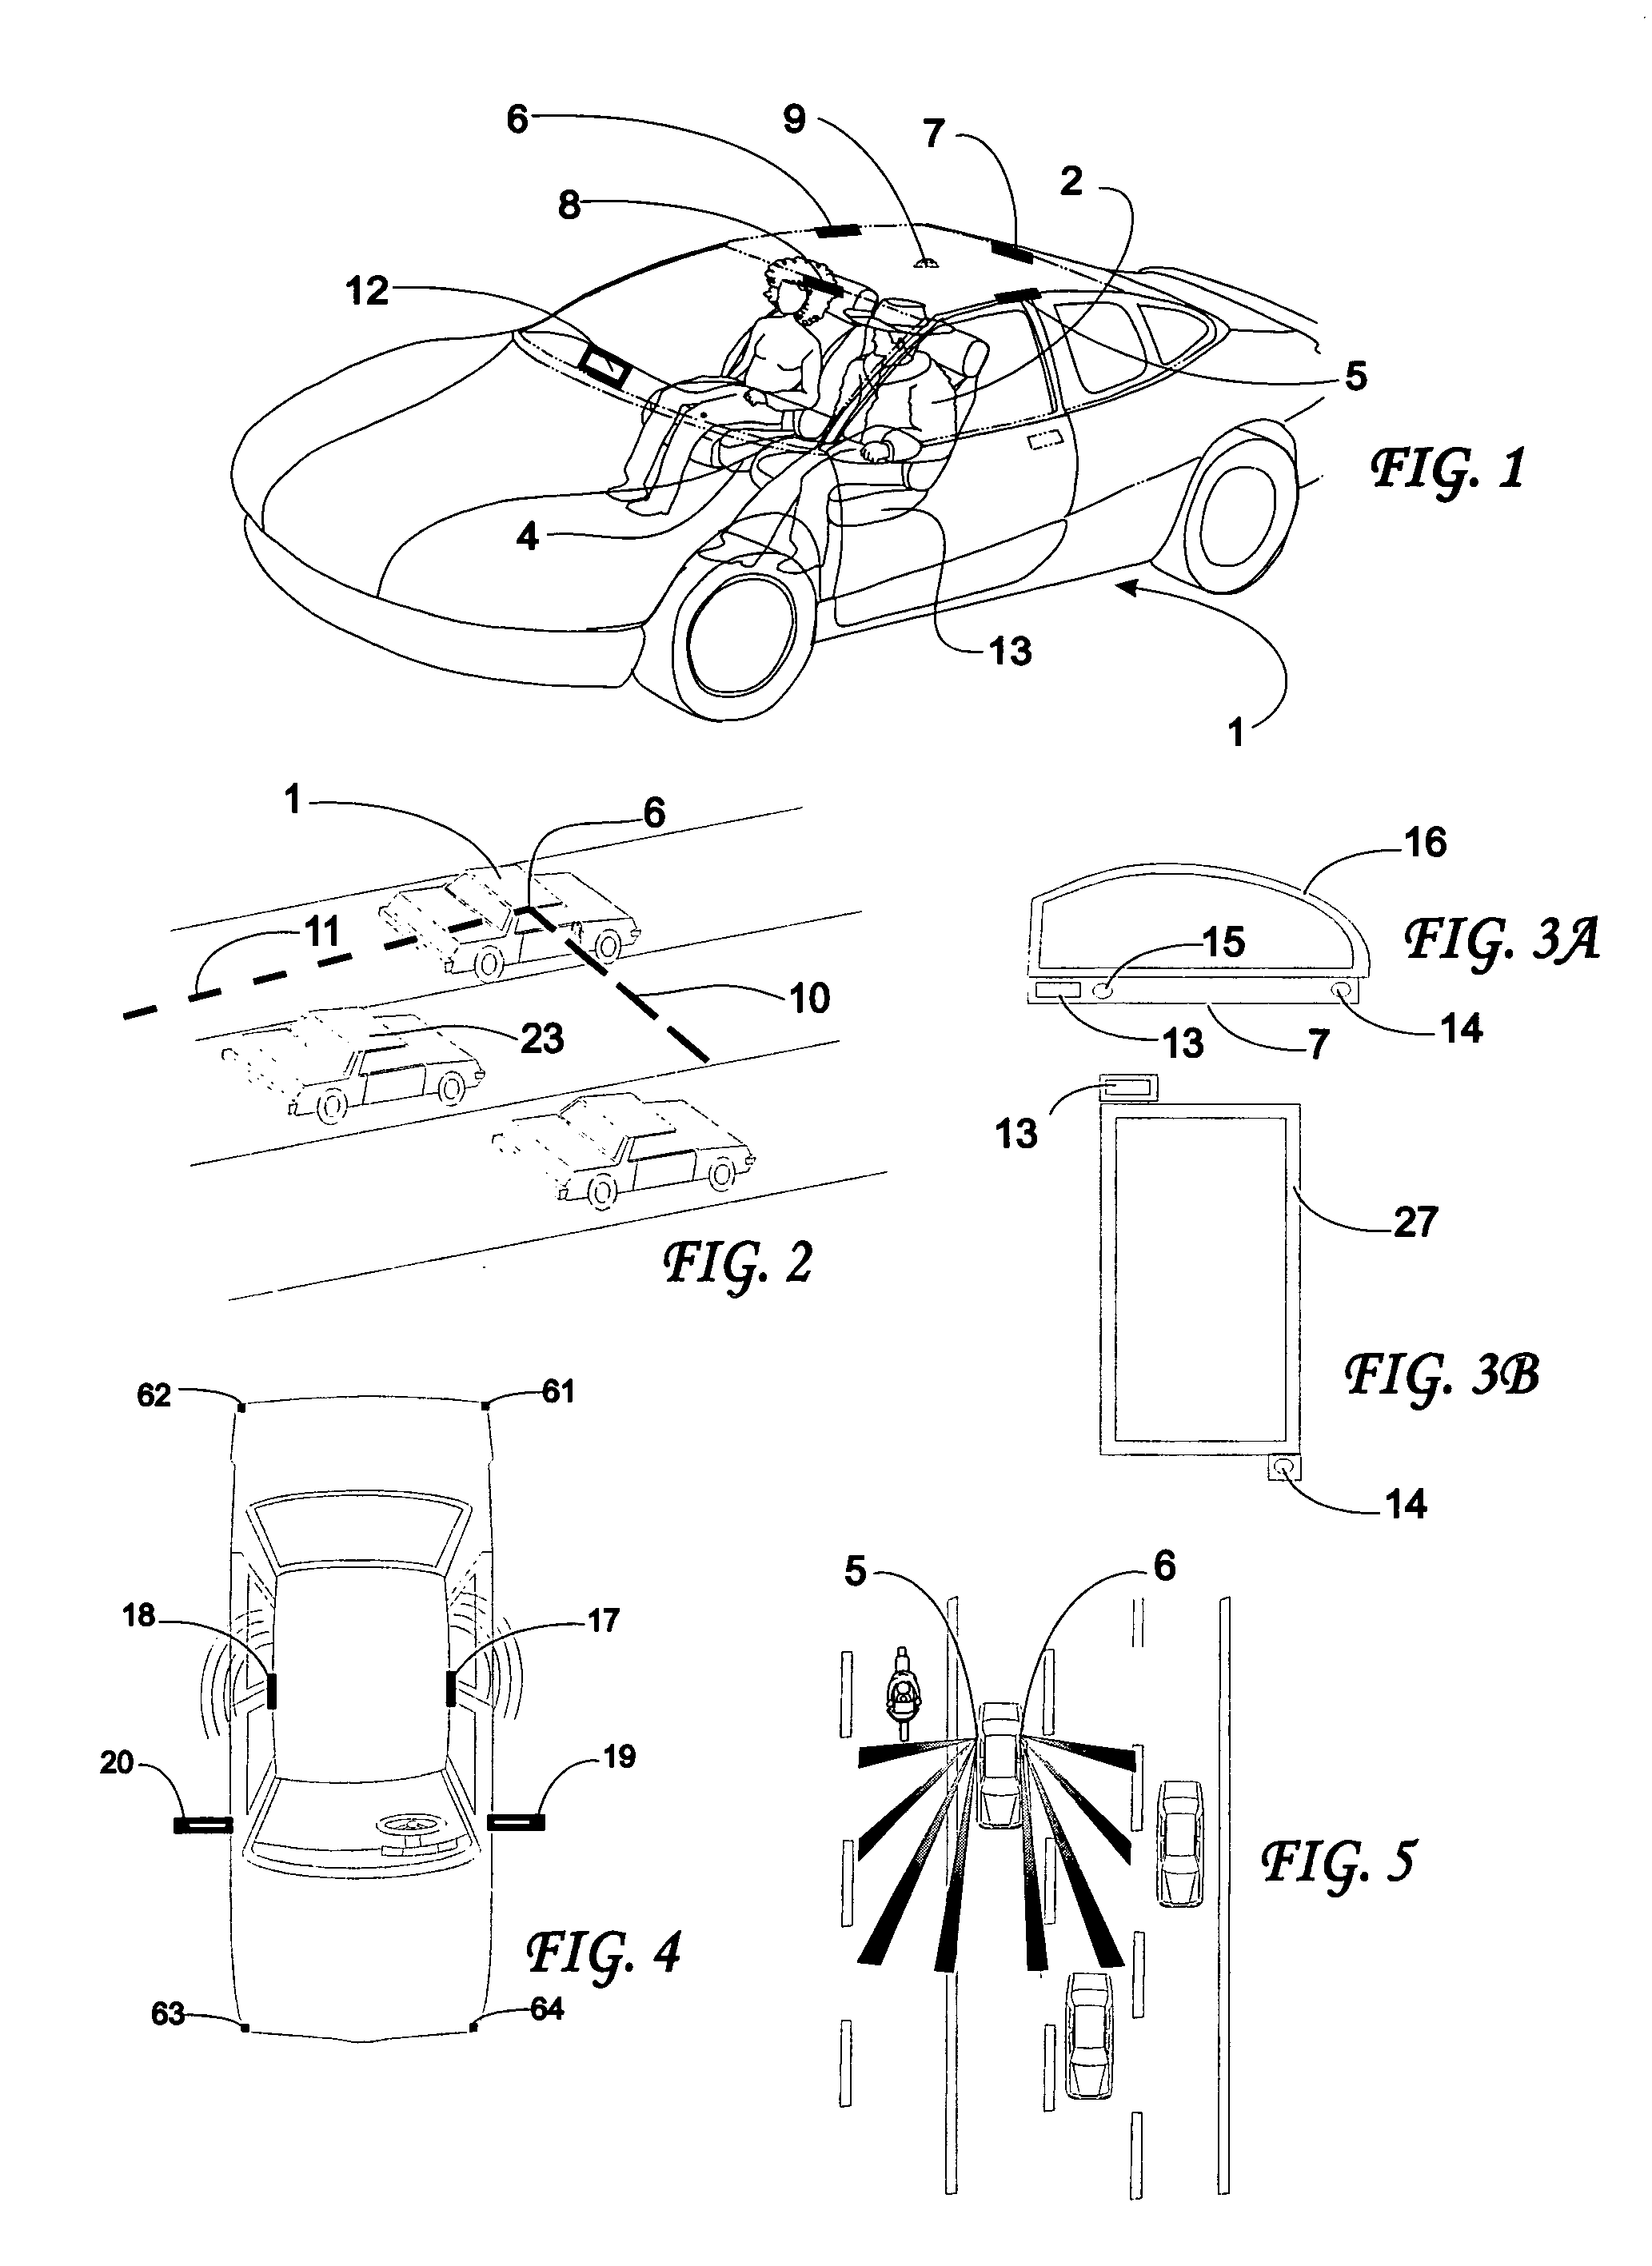 Vehicular impact reactive system and method